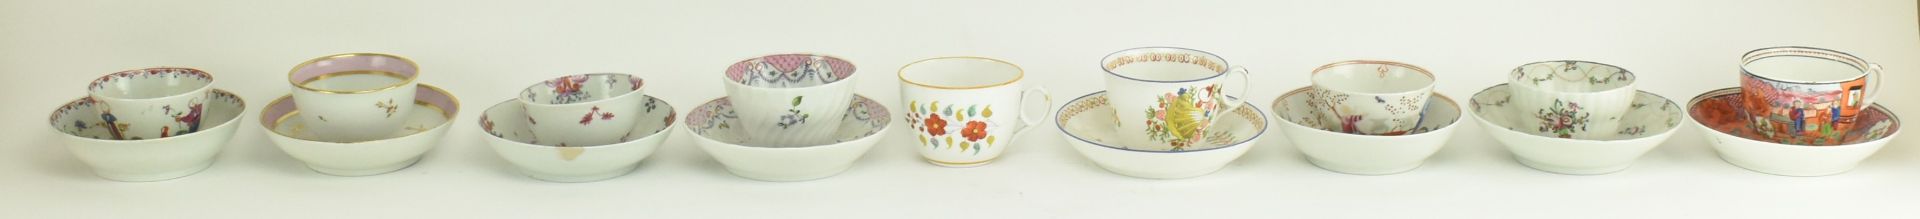 GROUP OF 18TH CENTURY NEWHALL PORCELAIN CUPS AND SAUCERS - Image 2 of 7